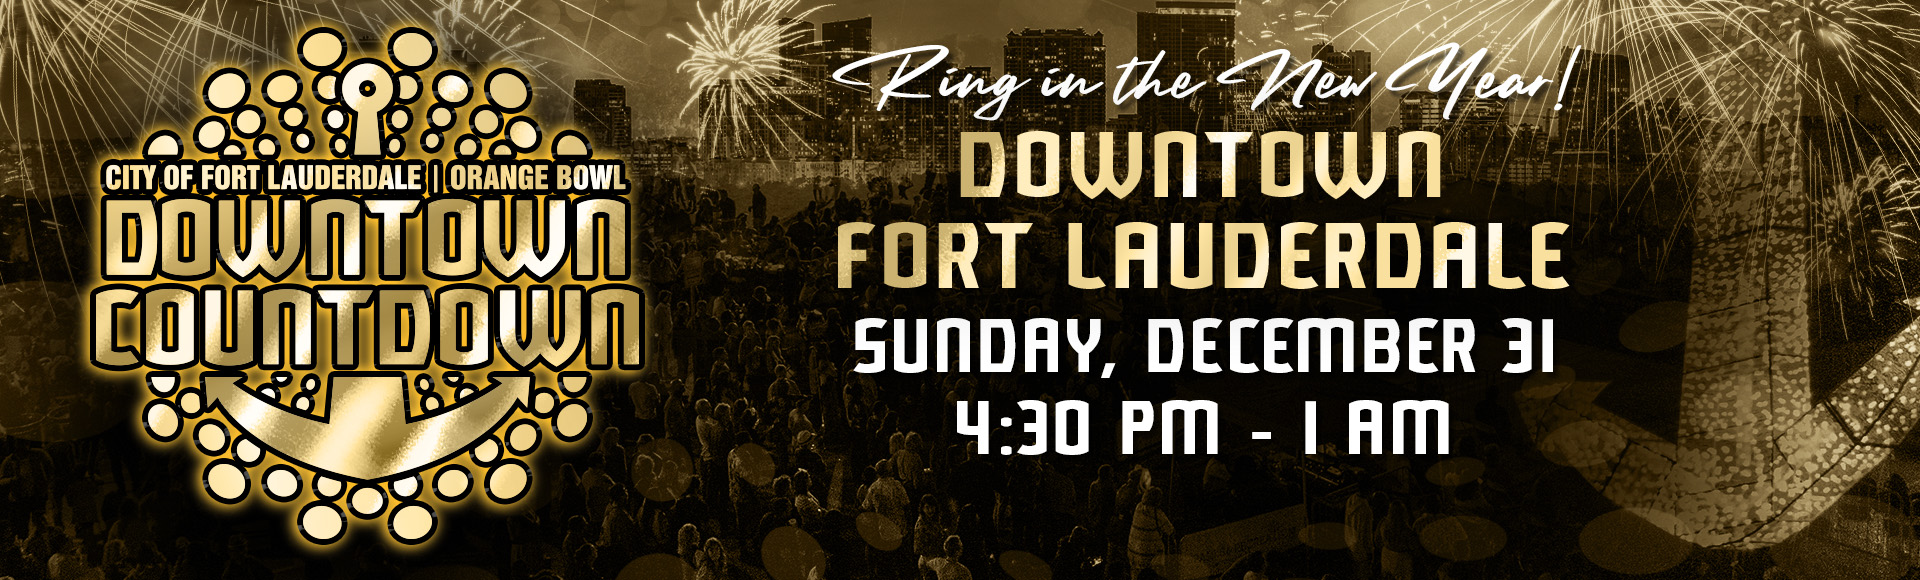 City of Fort Lauderdale Orange Bowl Downtown Countdown. Ring in the new year. Downtown Fort Lauderdale. December 31. 4:30 PM to 1 AM. Gold and black ball against a city skyline done in black and gold design. 